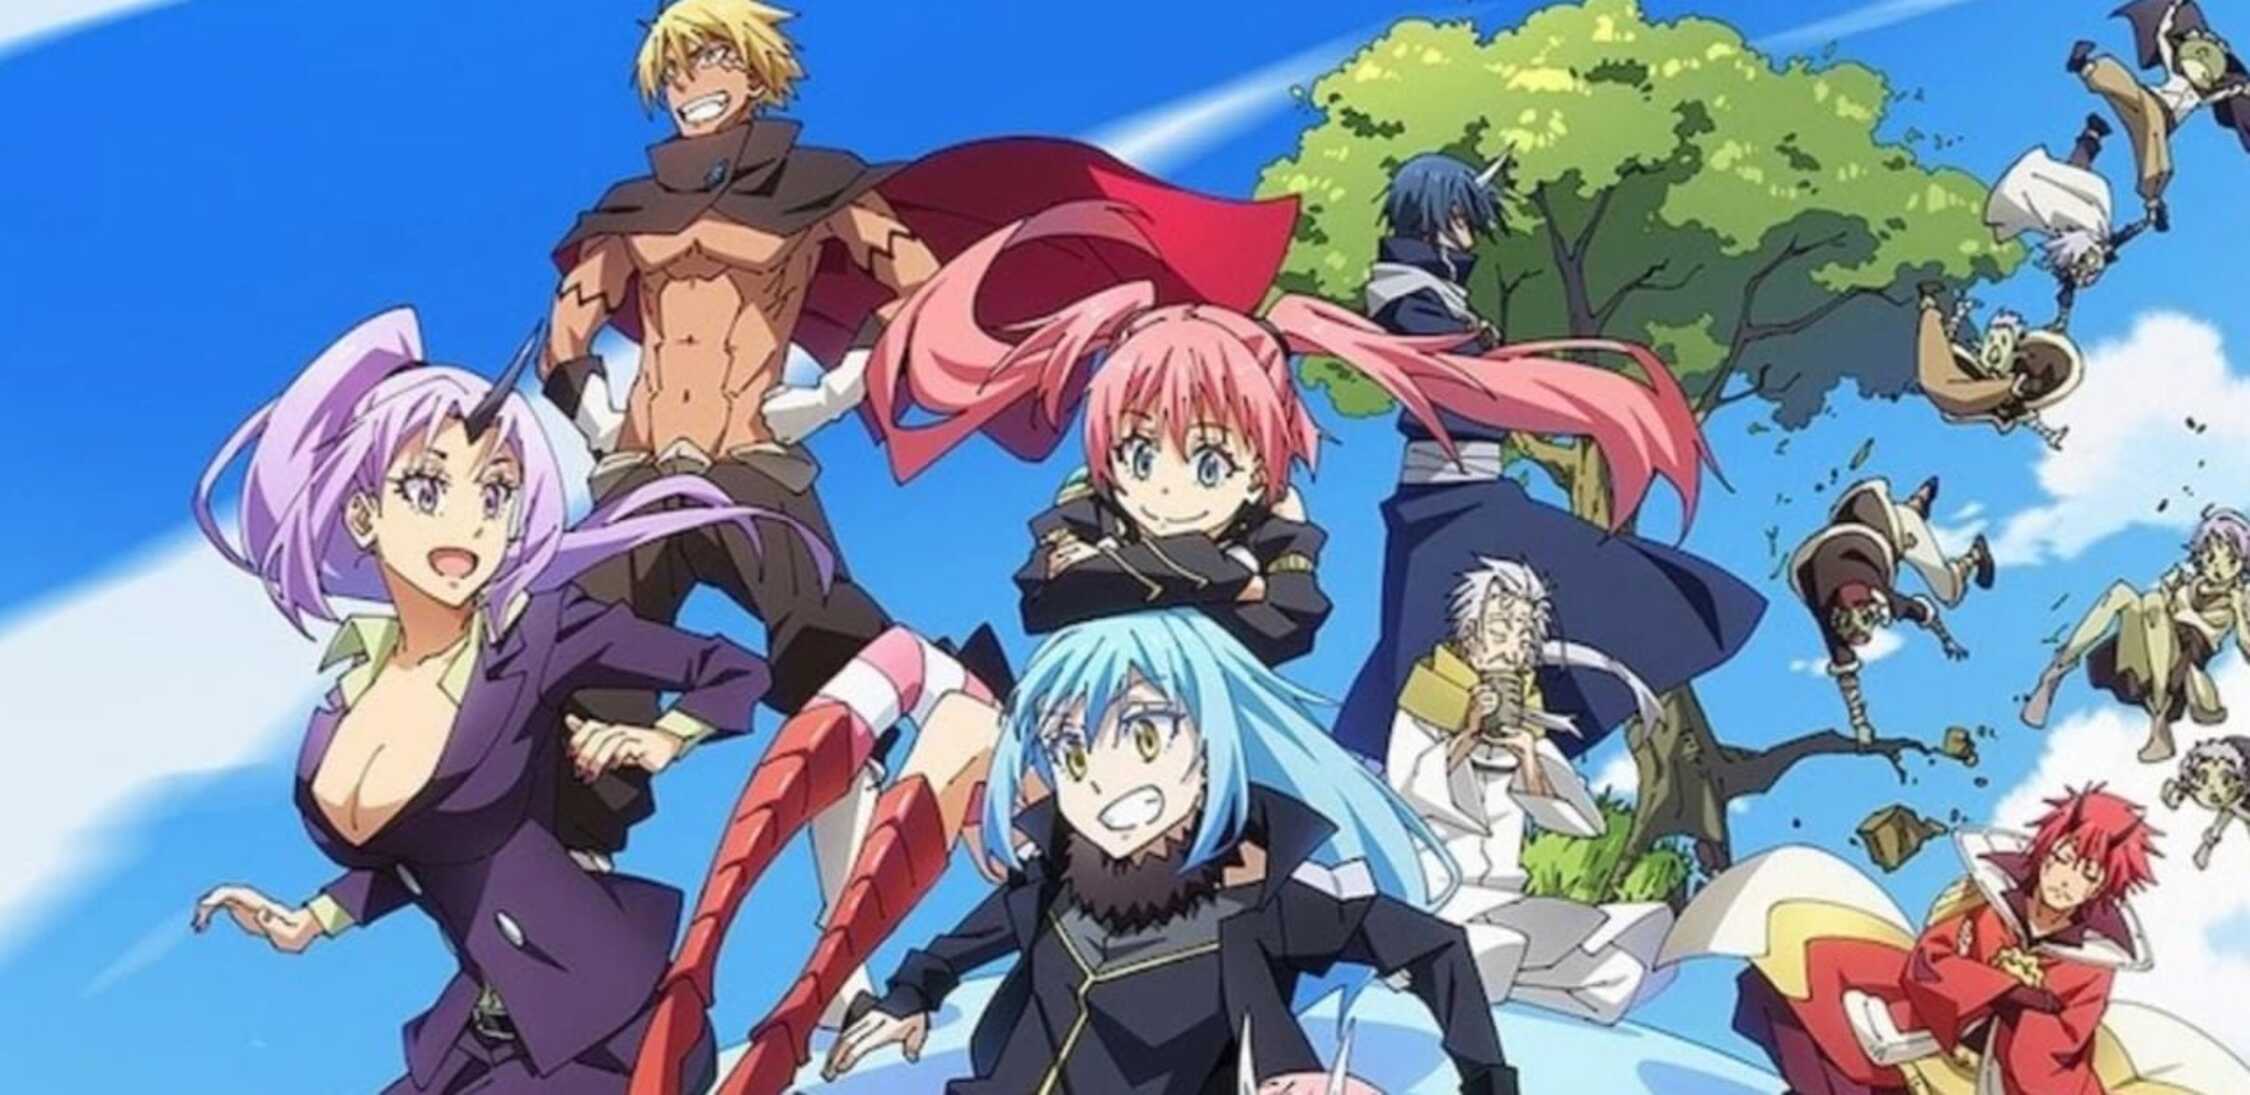 Rest easy, here's what you need to know about That Time I Got Reincarnated  as a Slime | Popverse